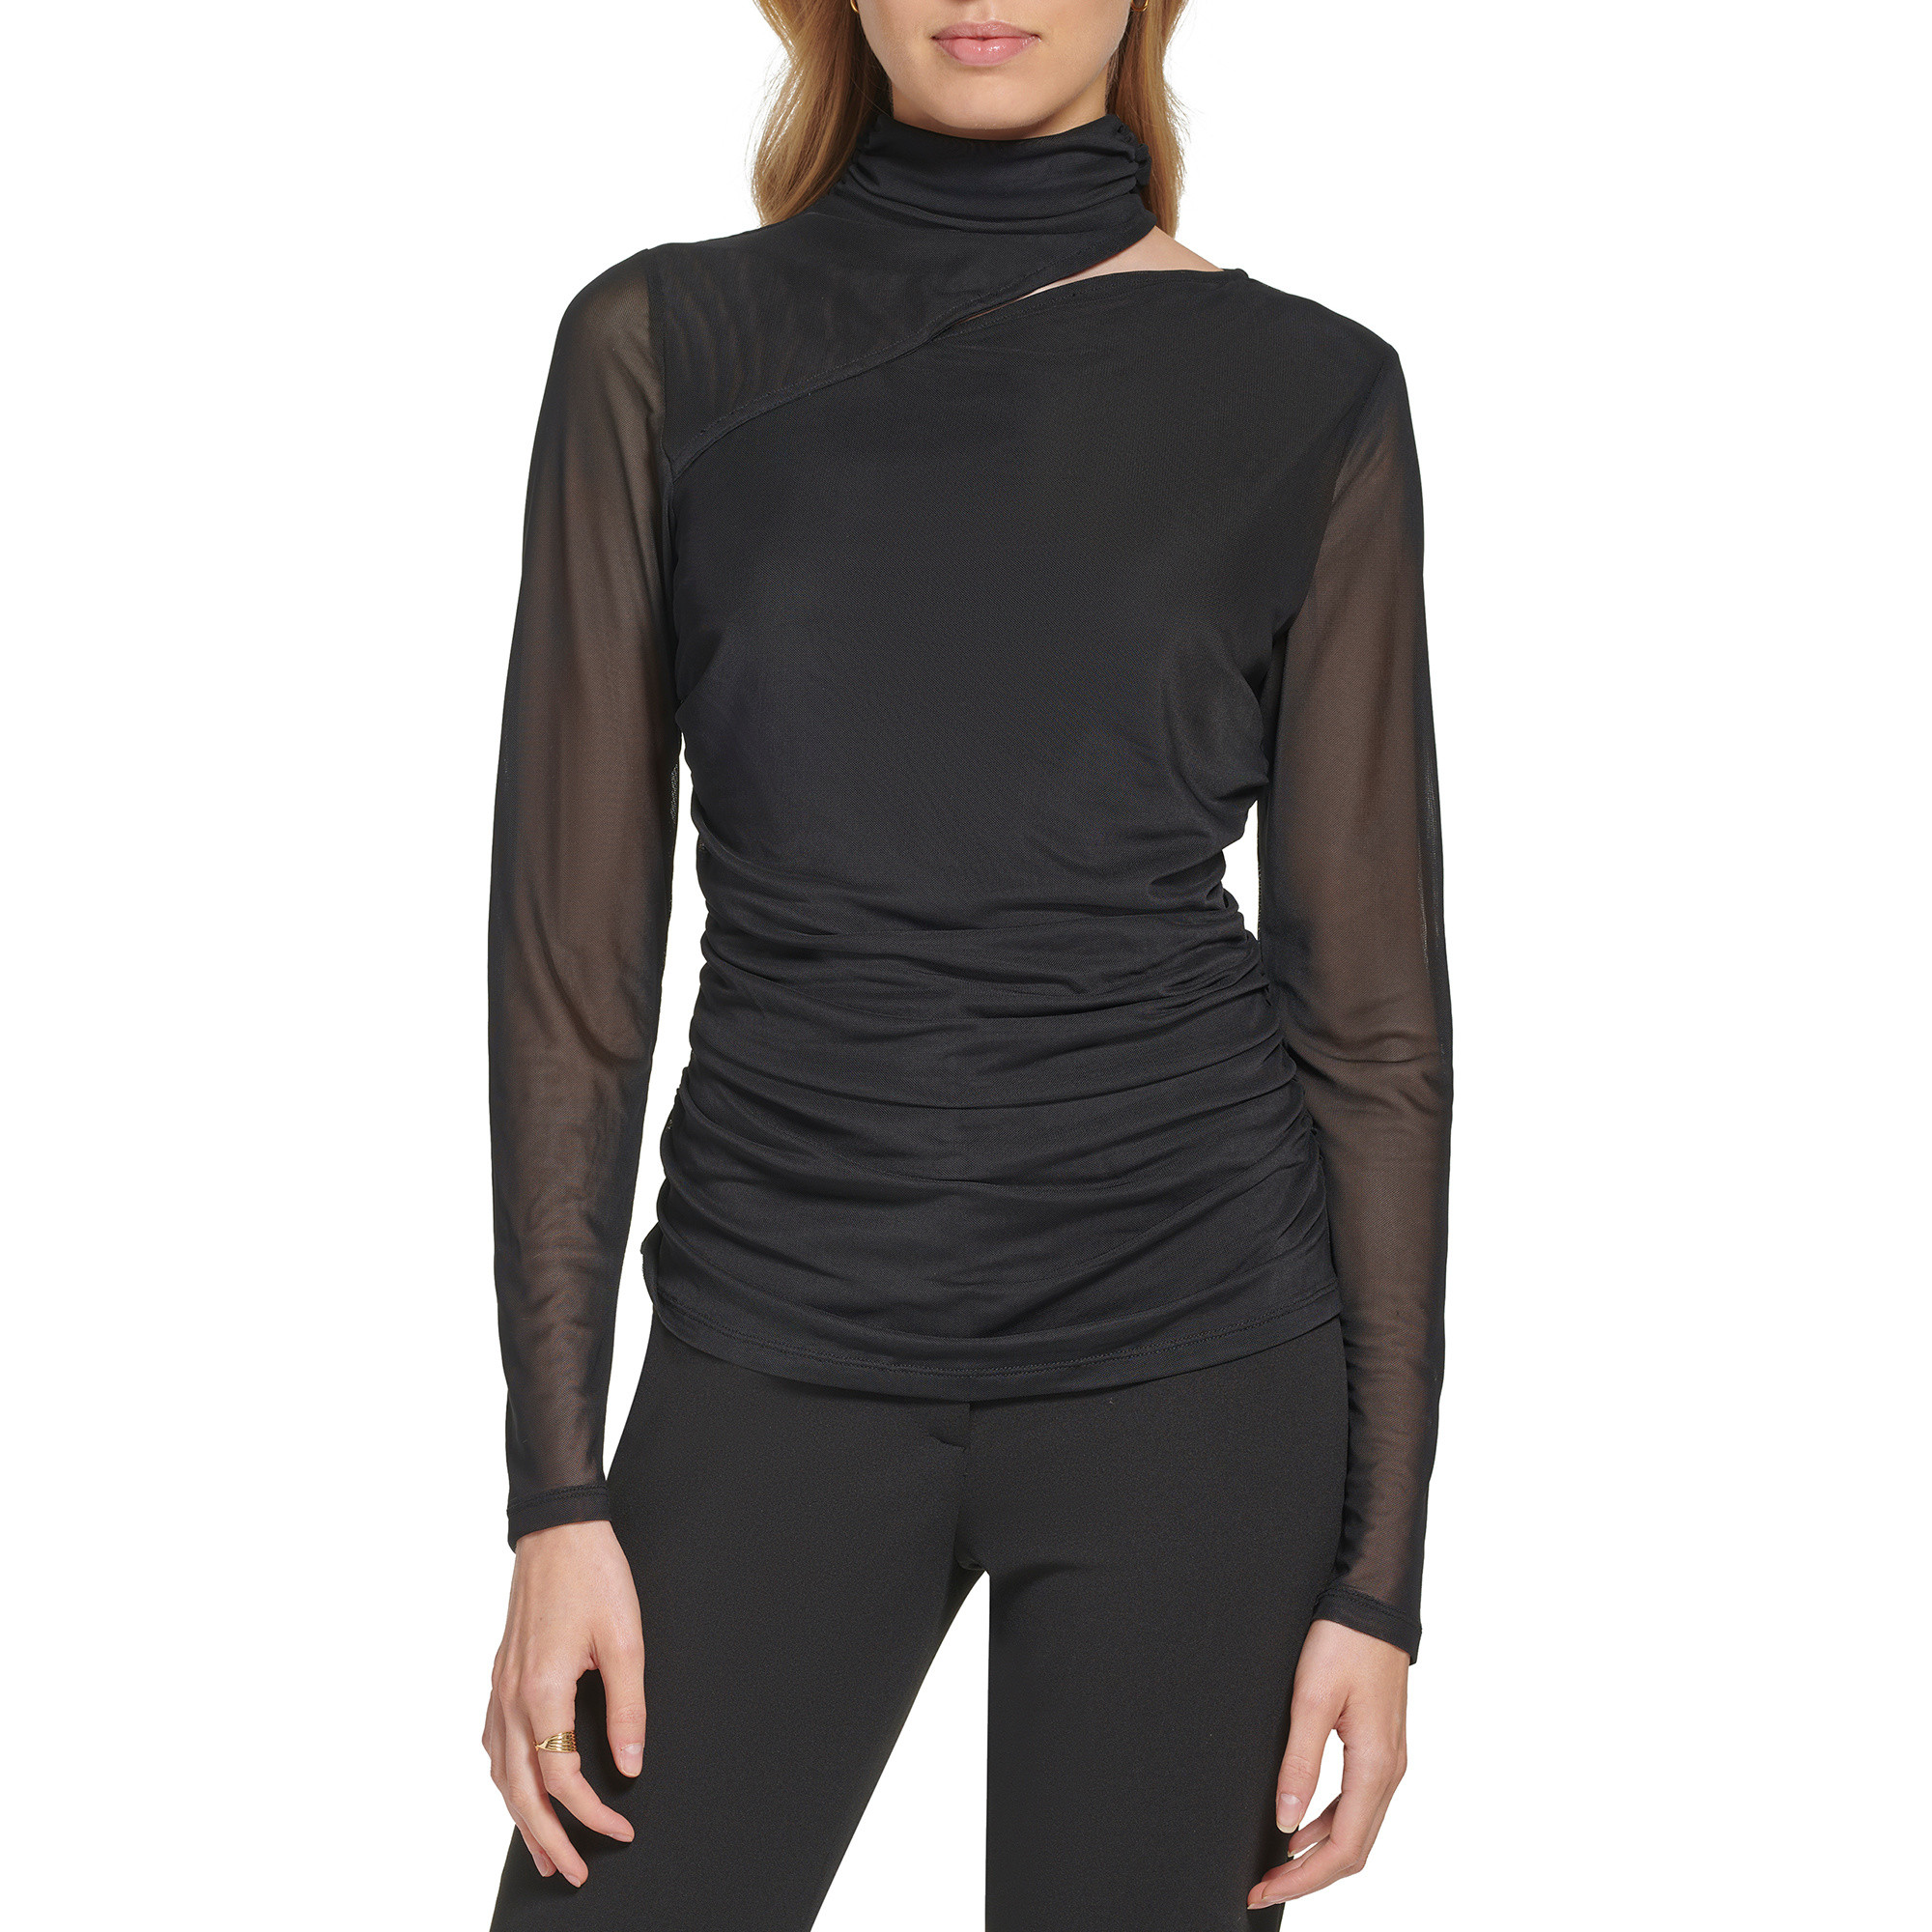 DKNY - Maglia in mesh con dettaglio cut out, Nero, large image number 2